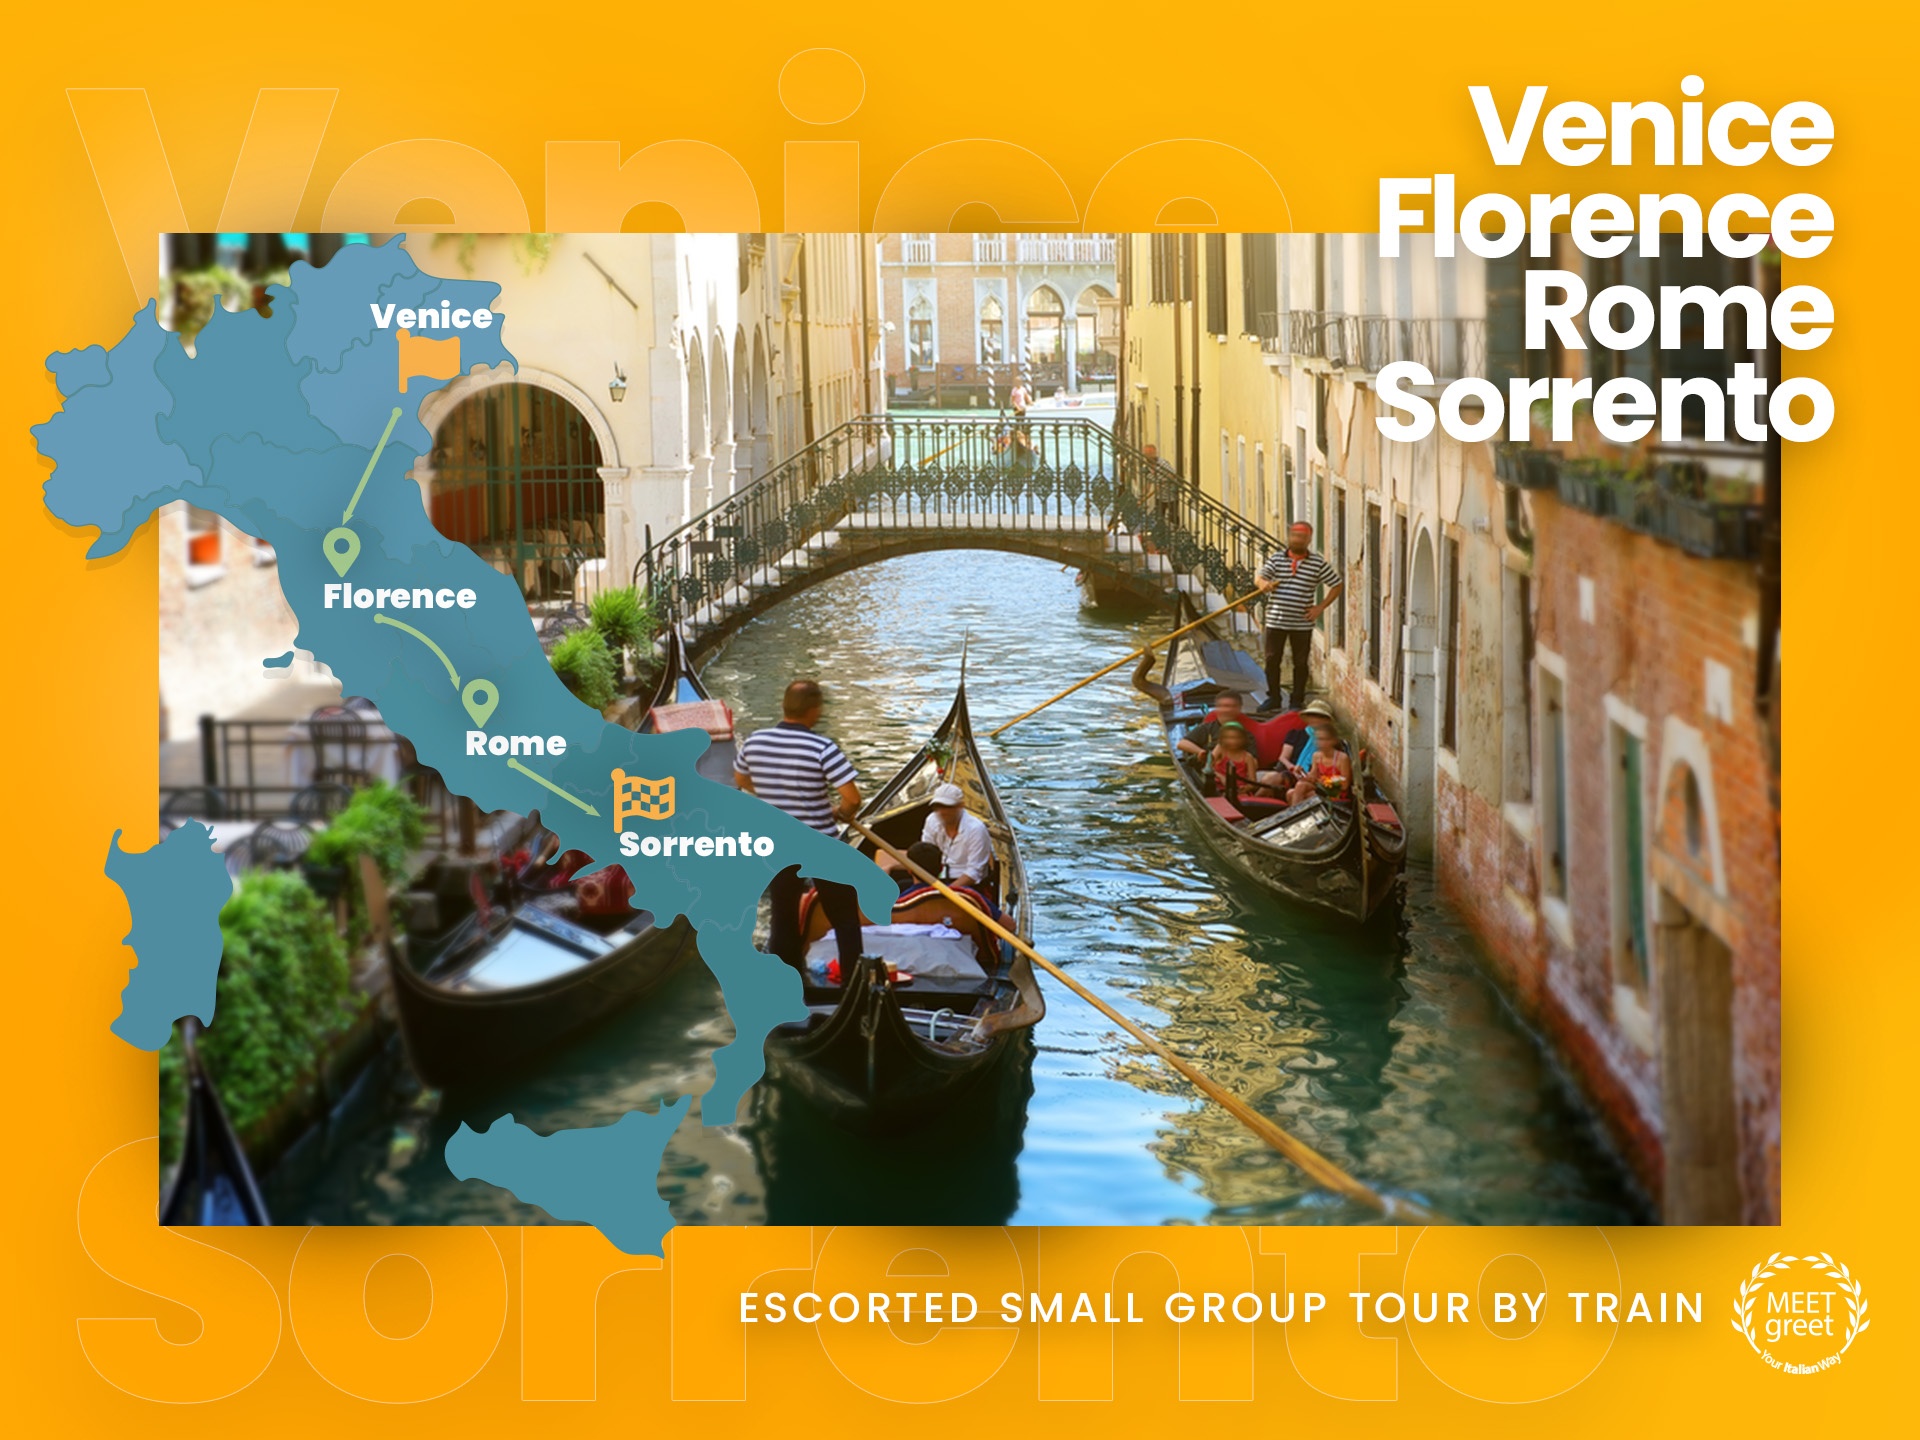 tourhub | Meet & Greet Italy | Venice, Florence, Rome and Sorrento escorted small group by train with luggage service included | Tour Map